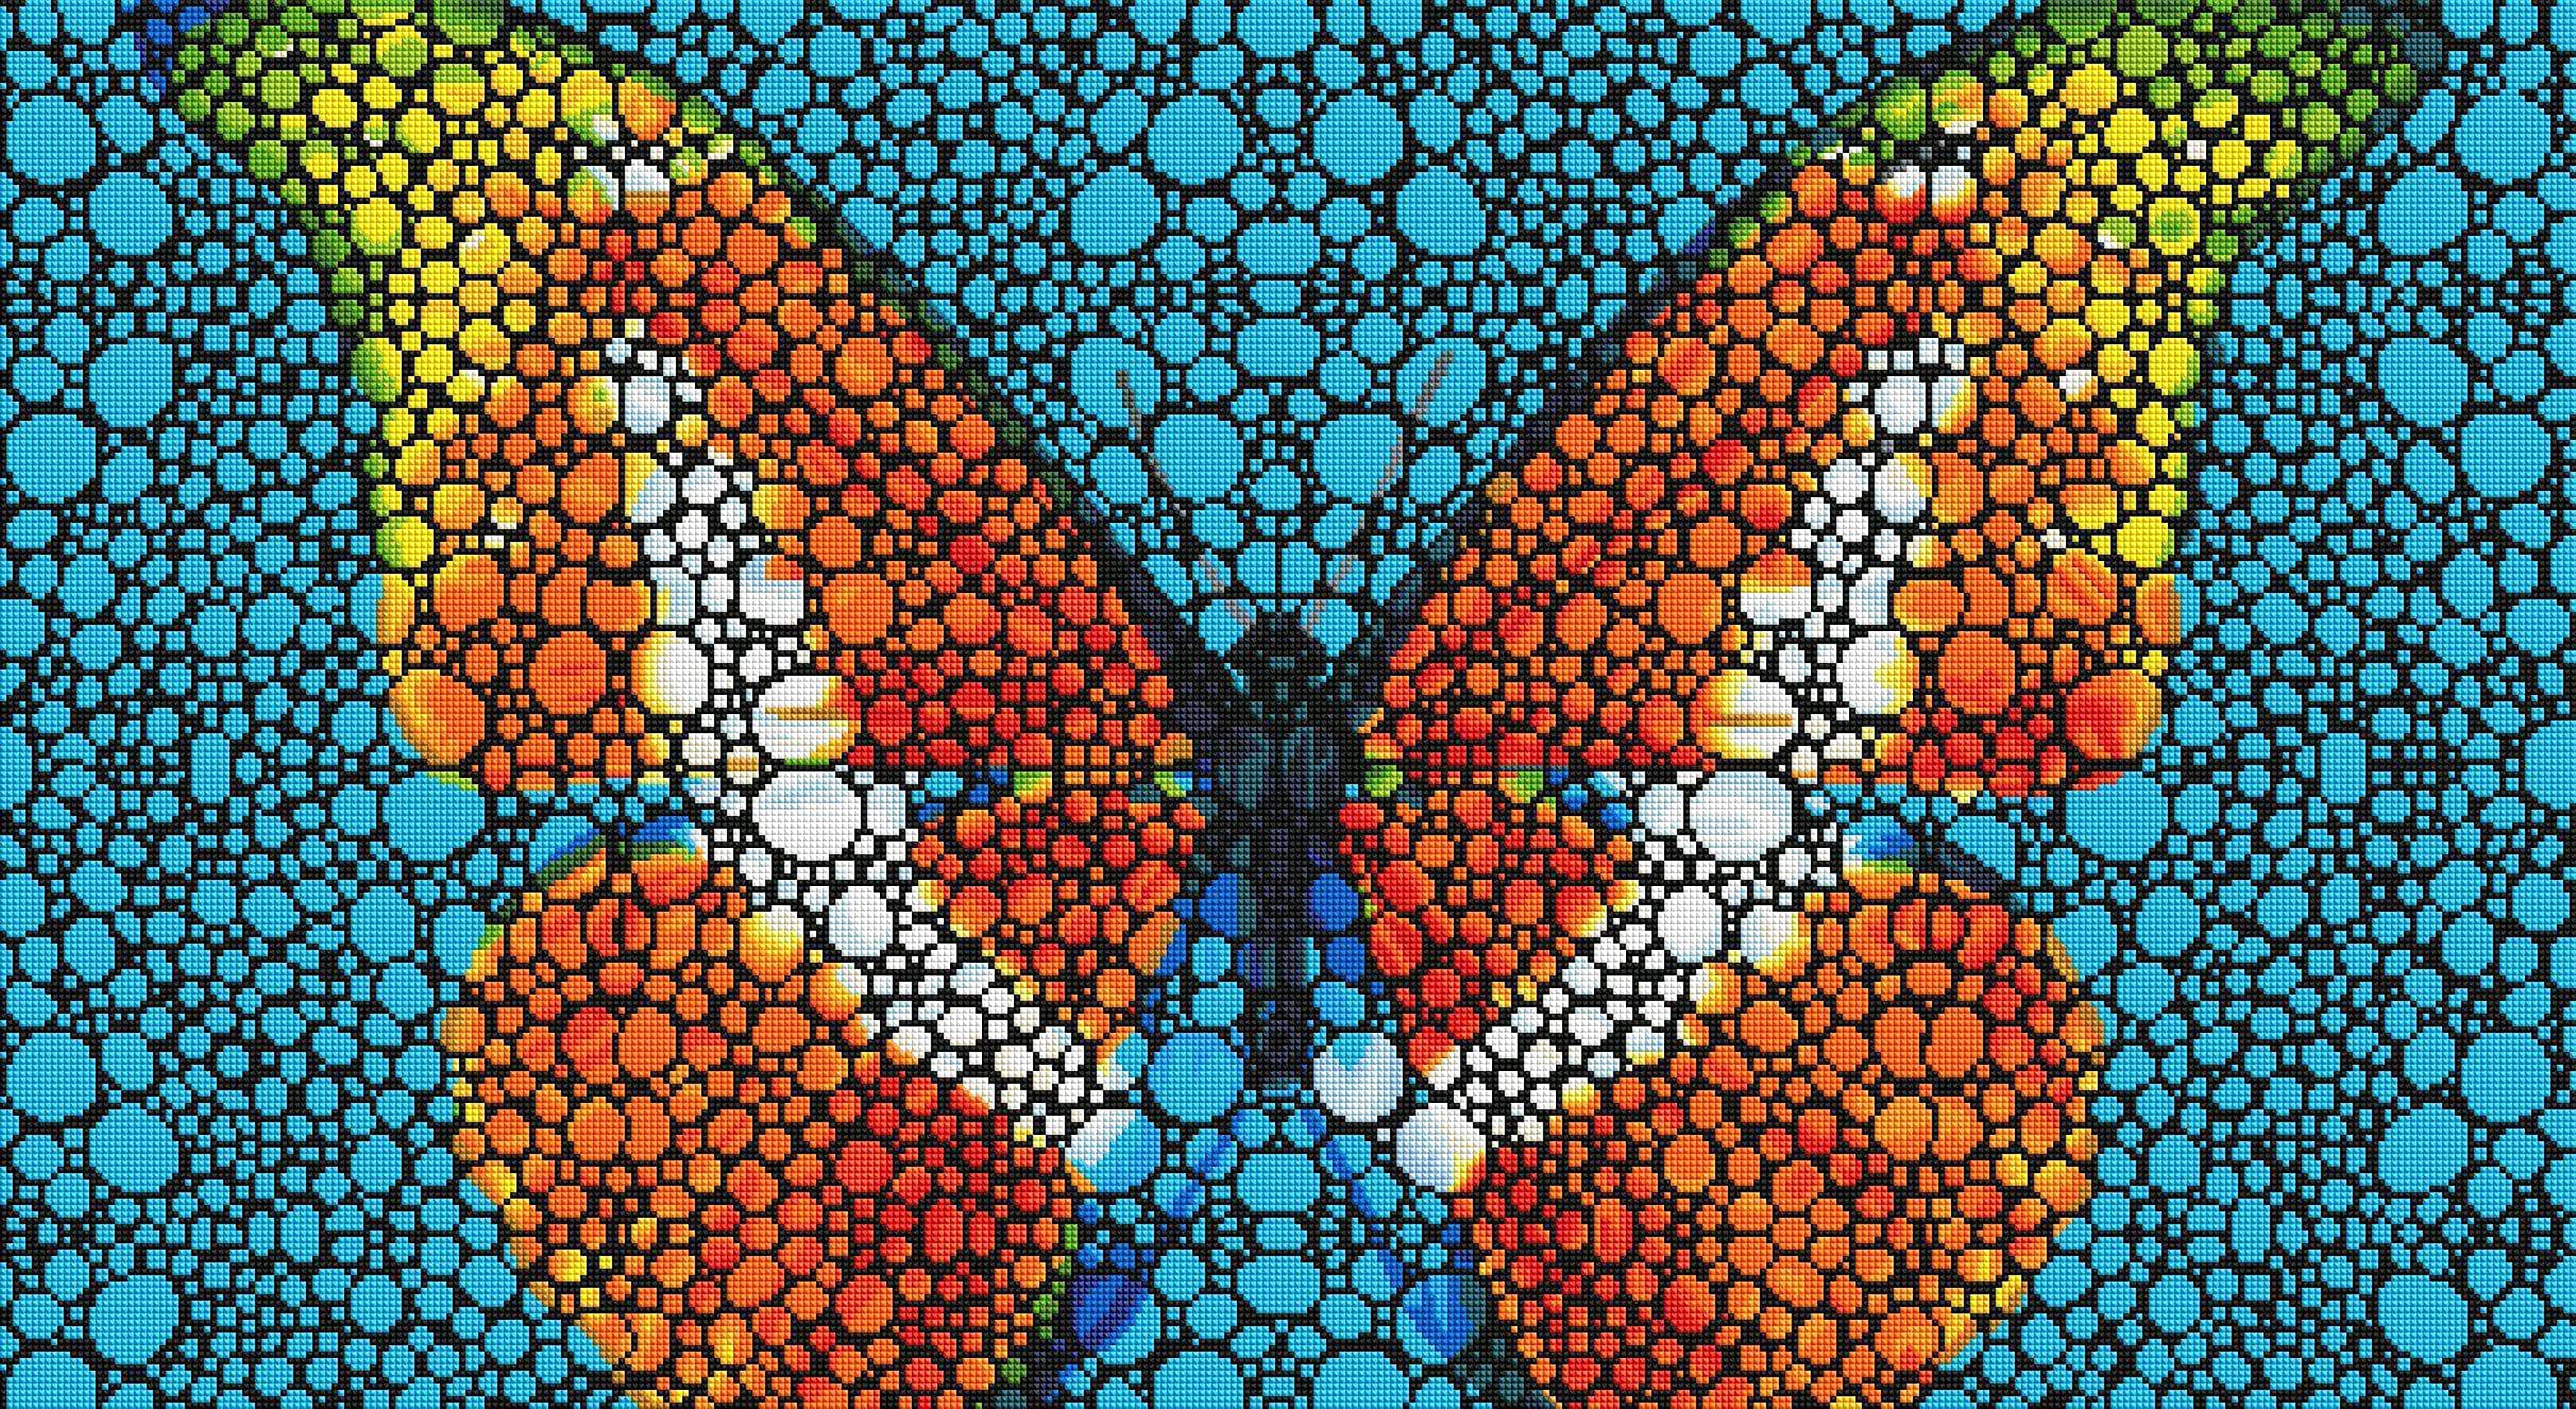 Diamond Painting - Square Drill - Colourful Butterfly(40*30cm